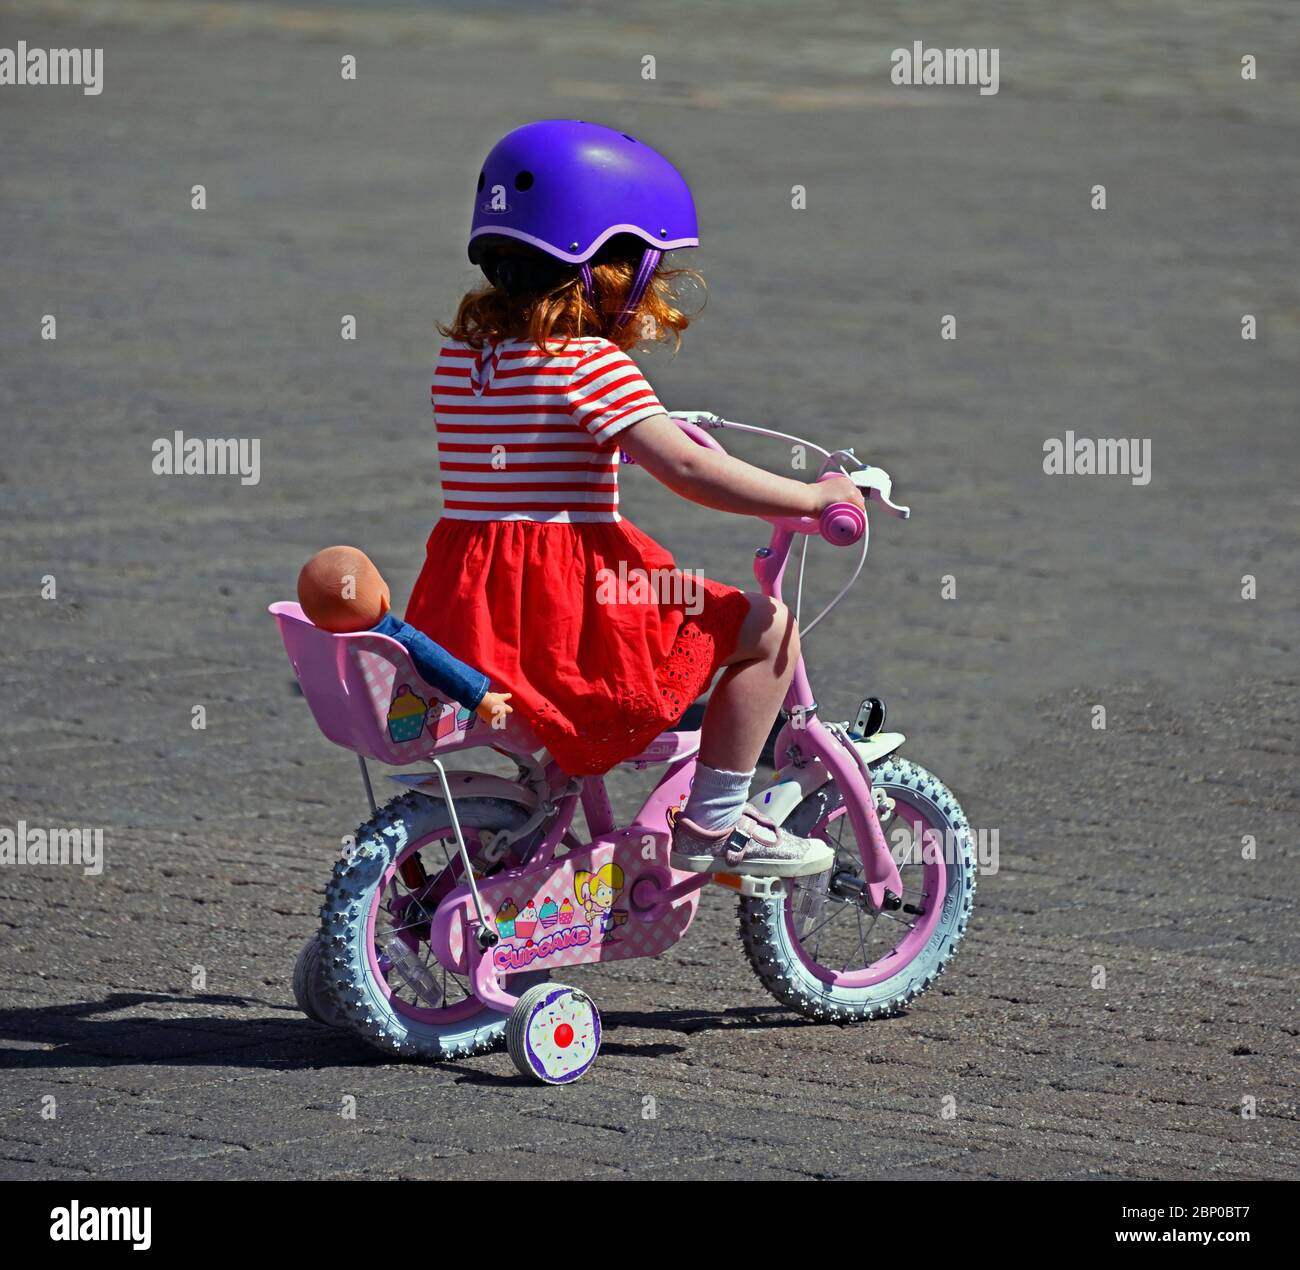 Small girl riding a bicycle with stabilisers. Market Place, Kendal, Cumbria, England, United Kingdom, Europe. Stock Photo